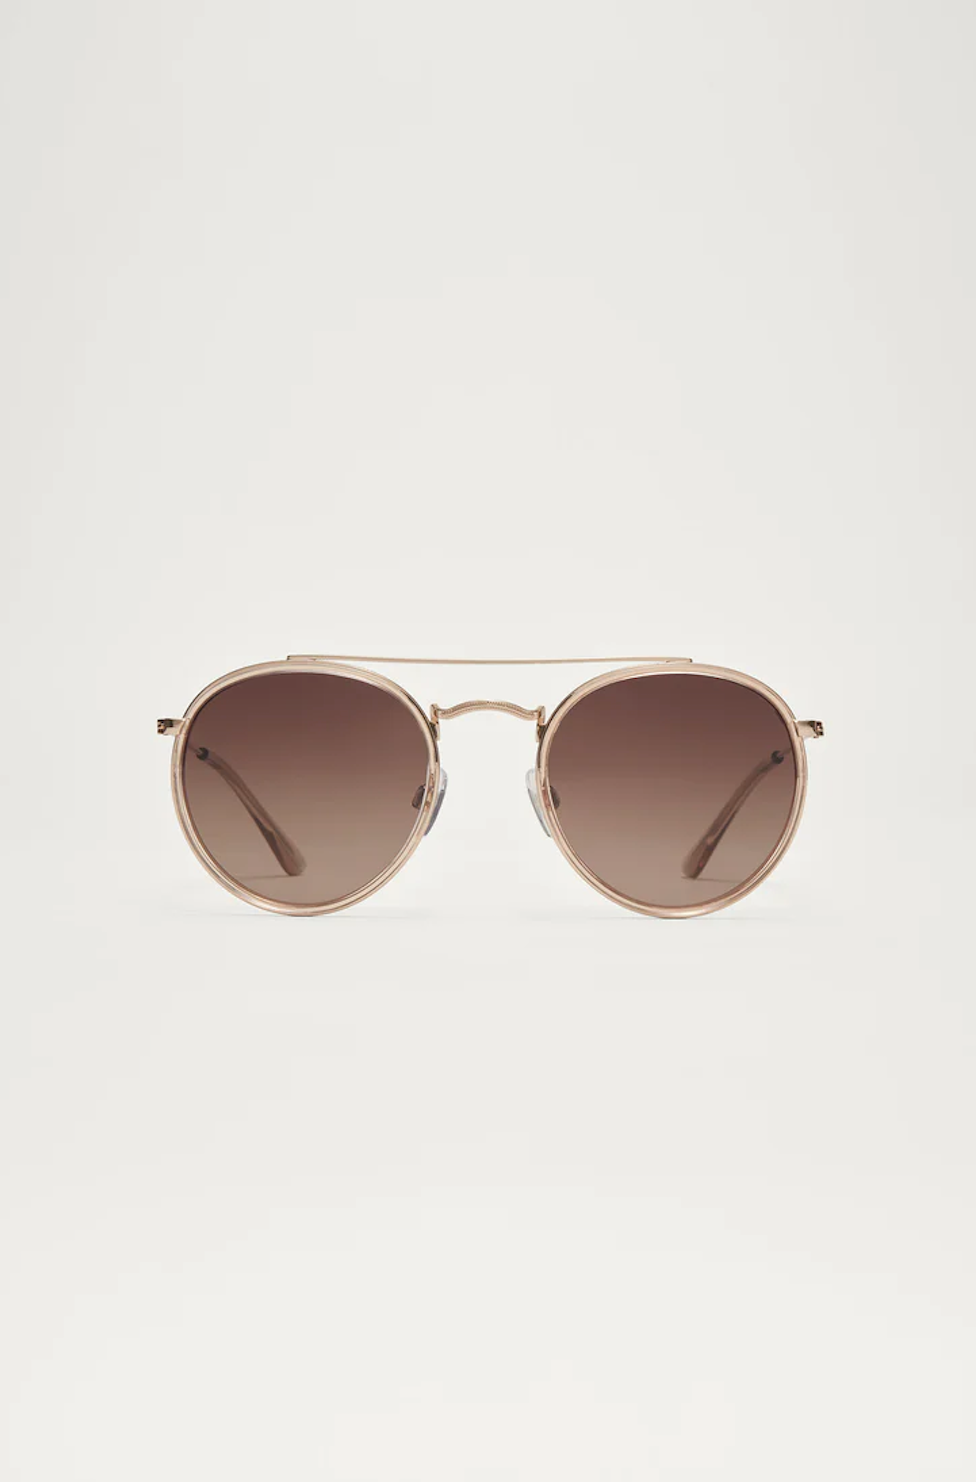 Z SUPPLY TRAVELLER SUNGLASSES IN CHAMPAGNE GRADIENT